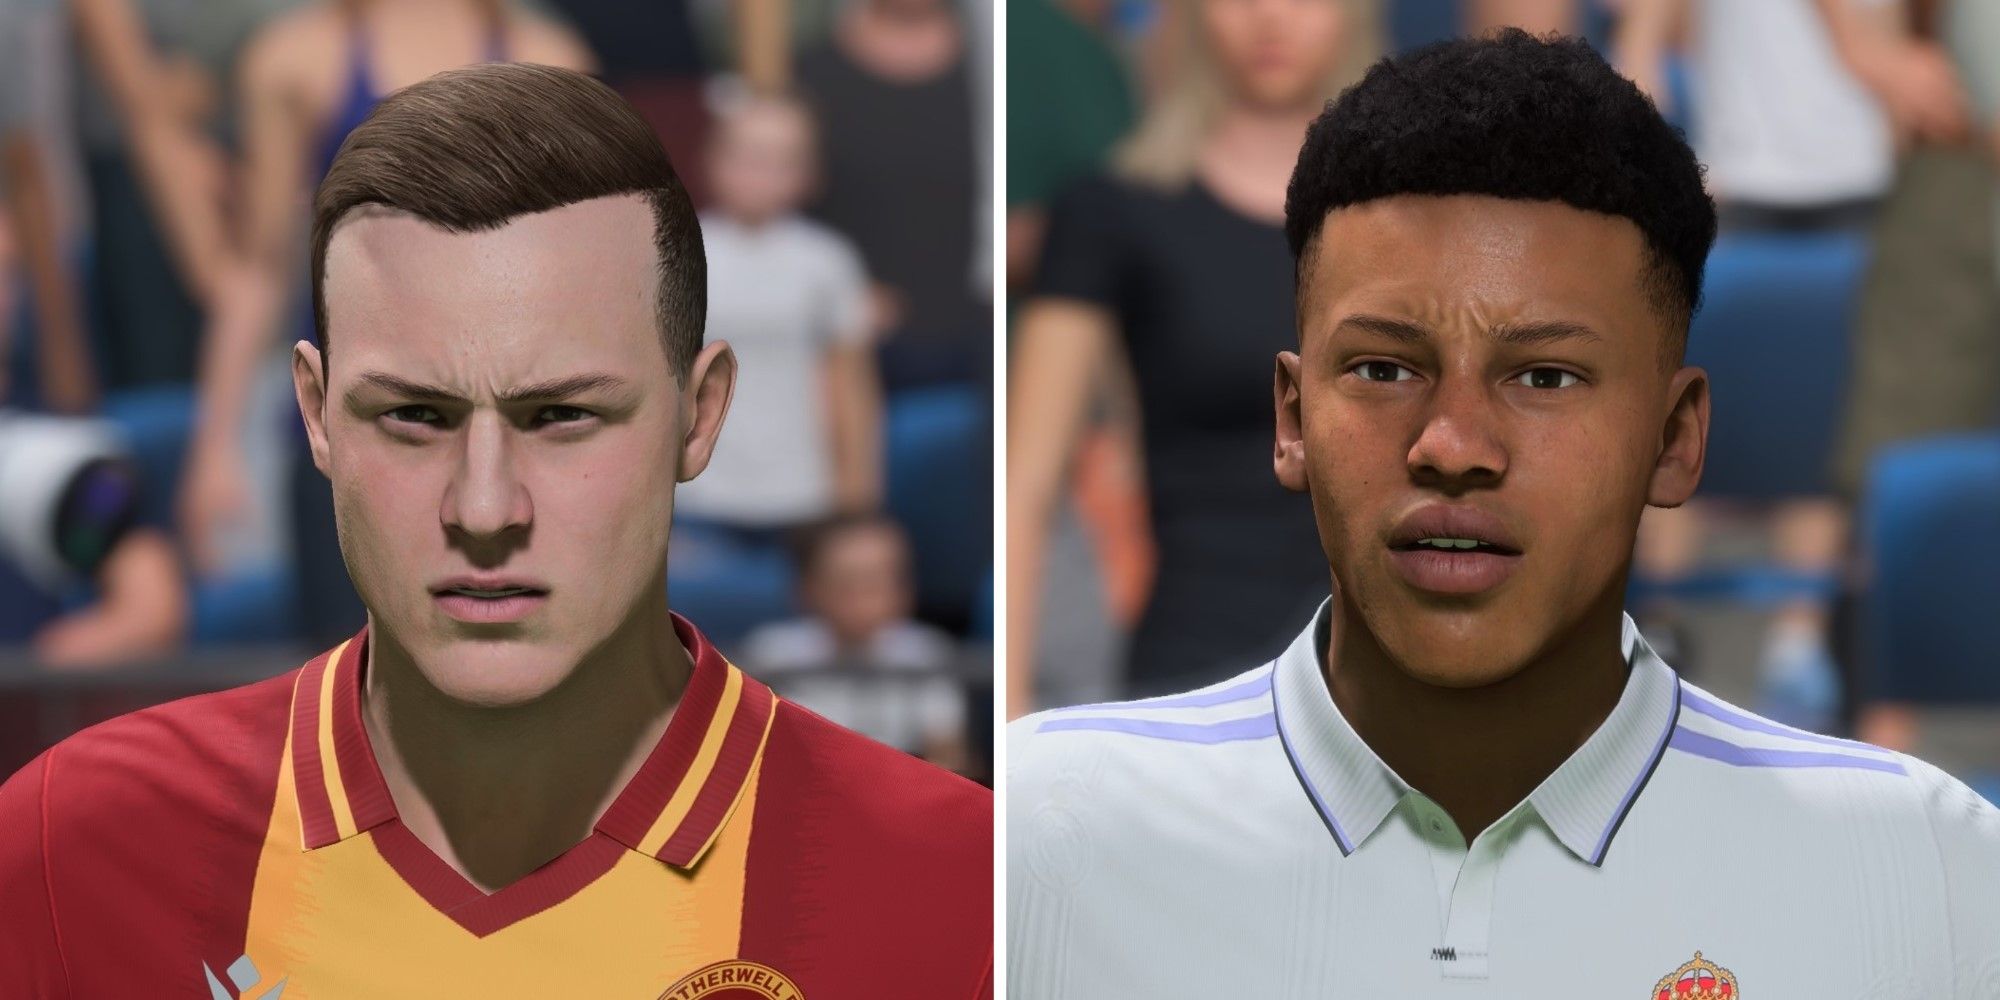 An image of Max Johnston and Vinicius Tobias in FIFA 23